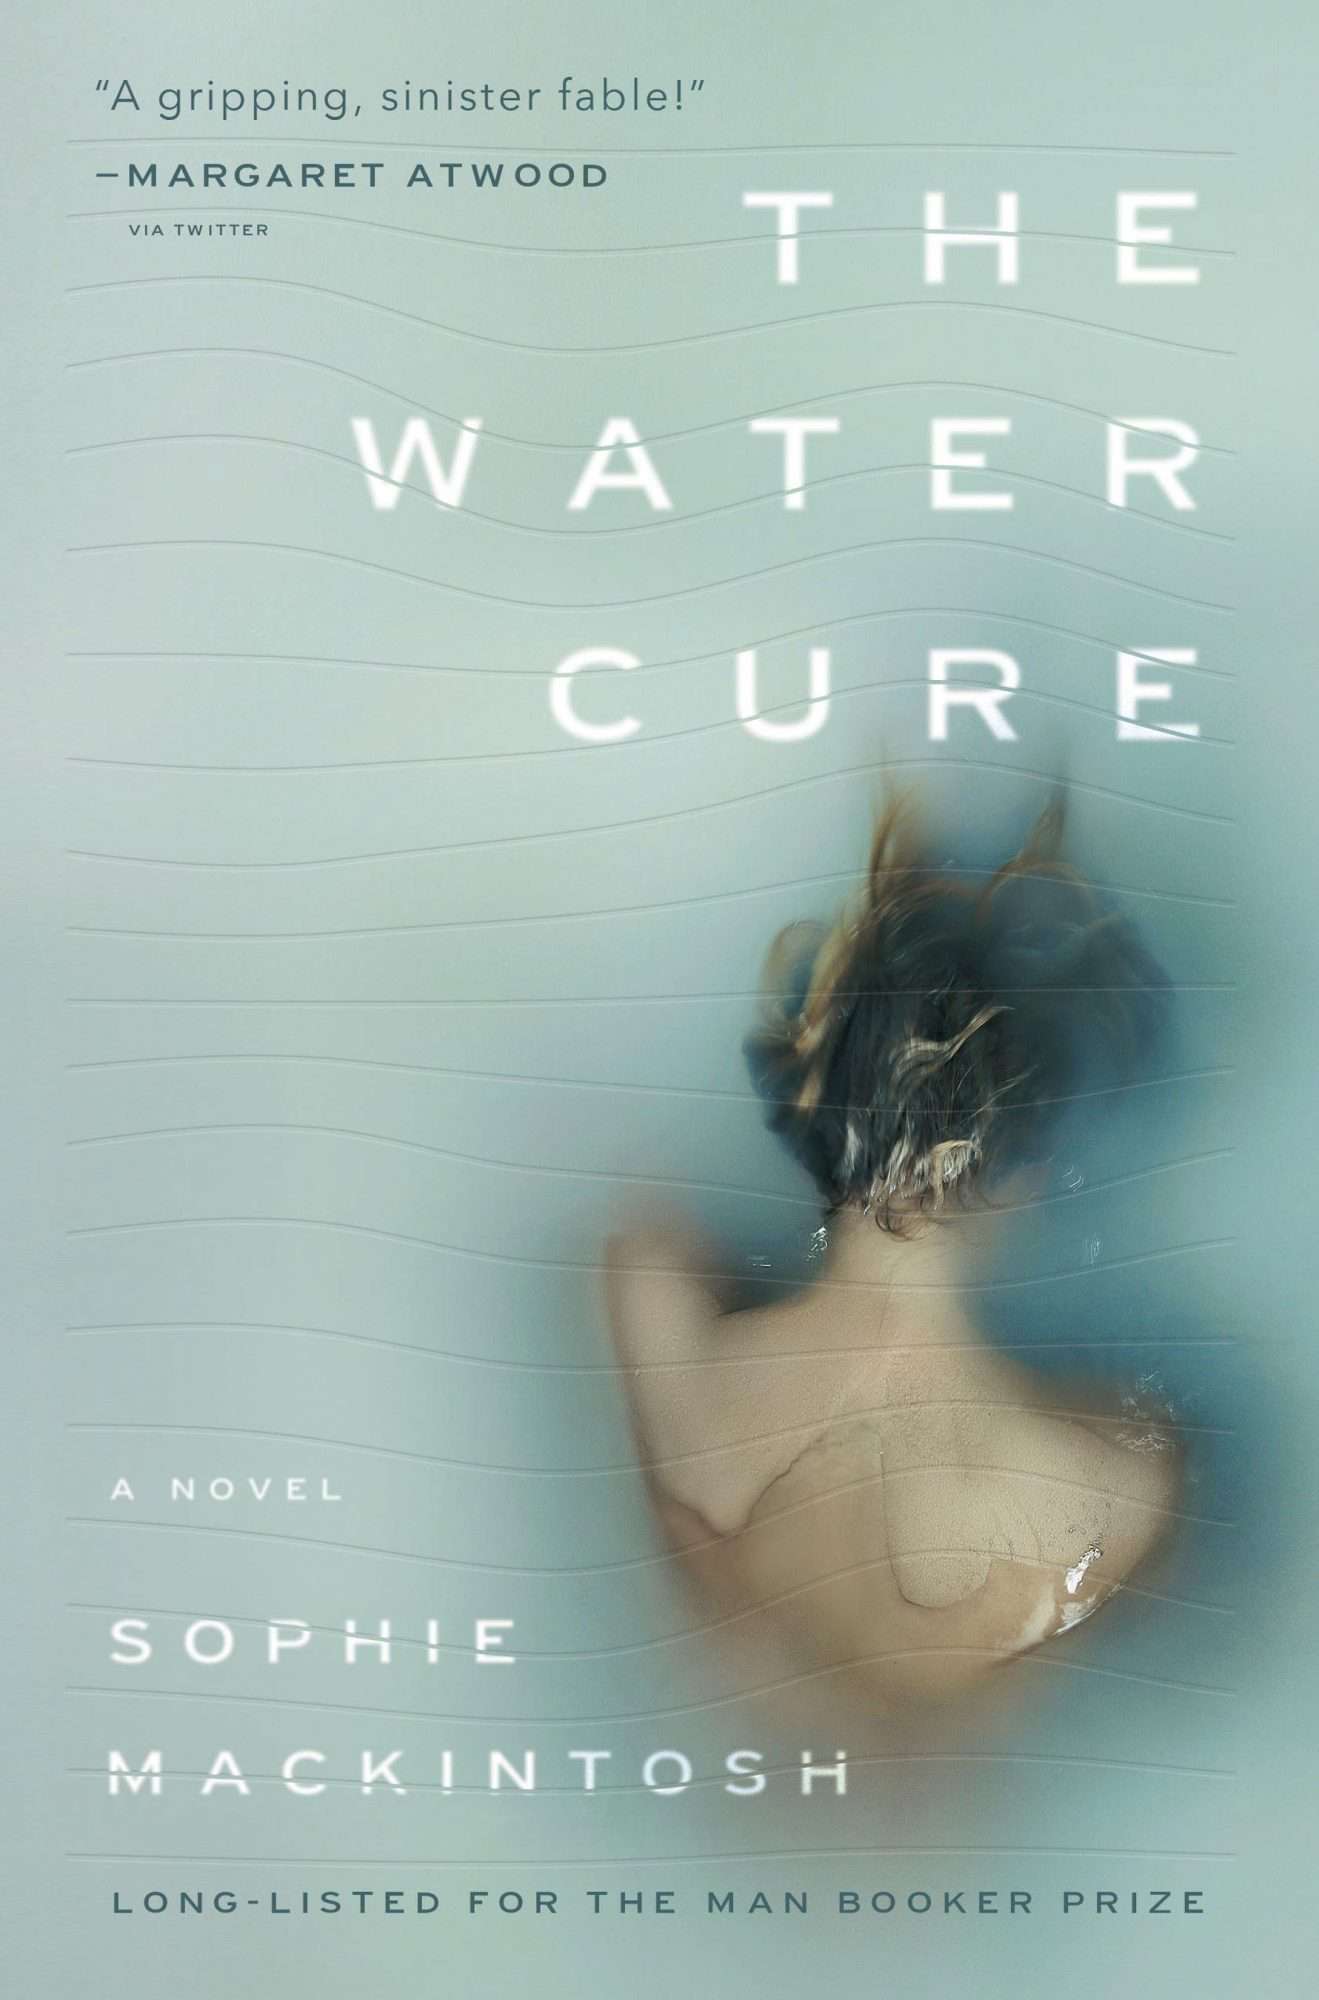 The Water Cure, by Sophie Mackintosh